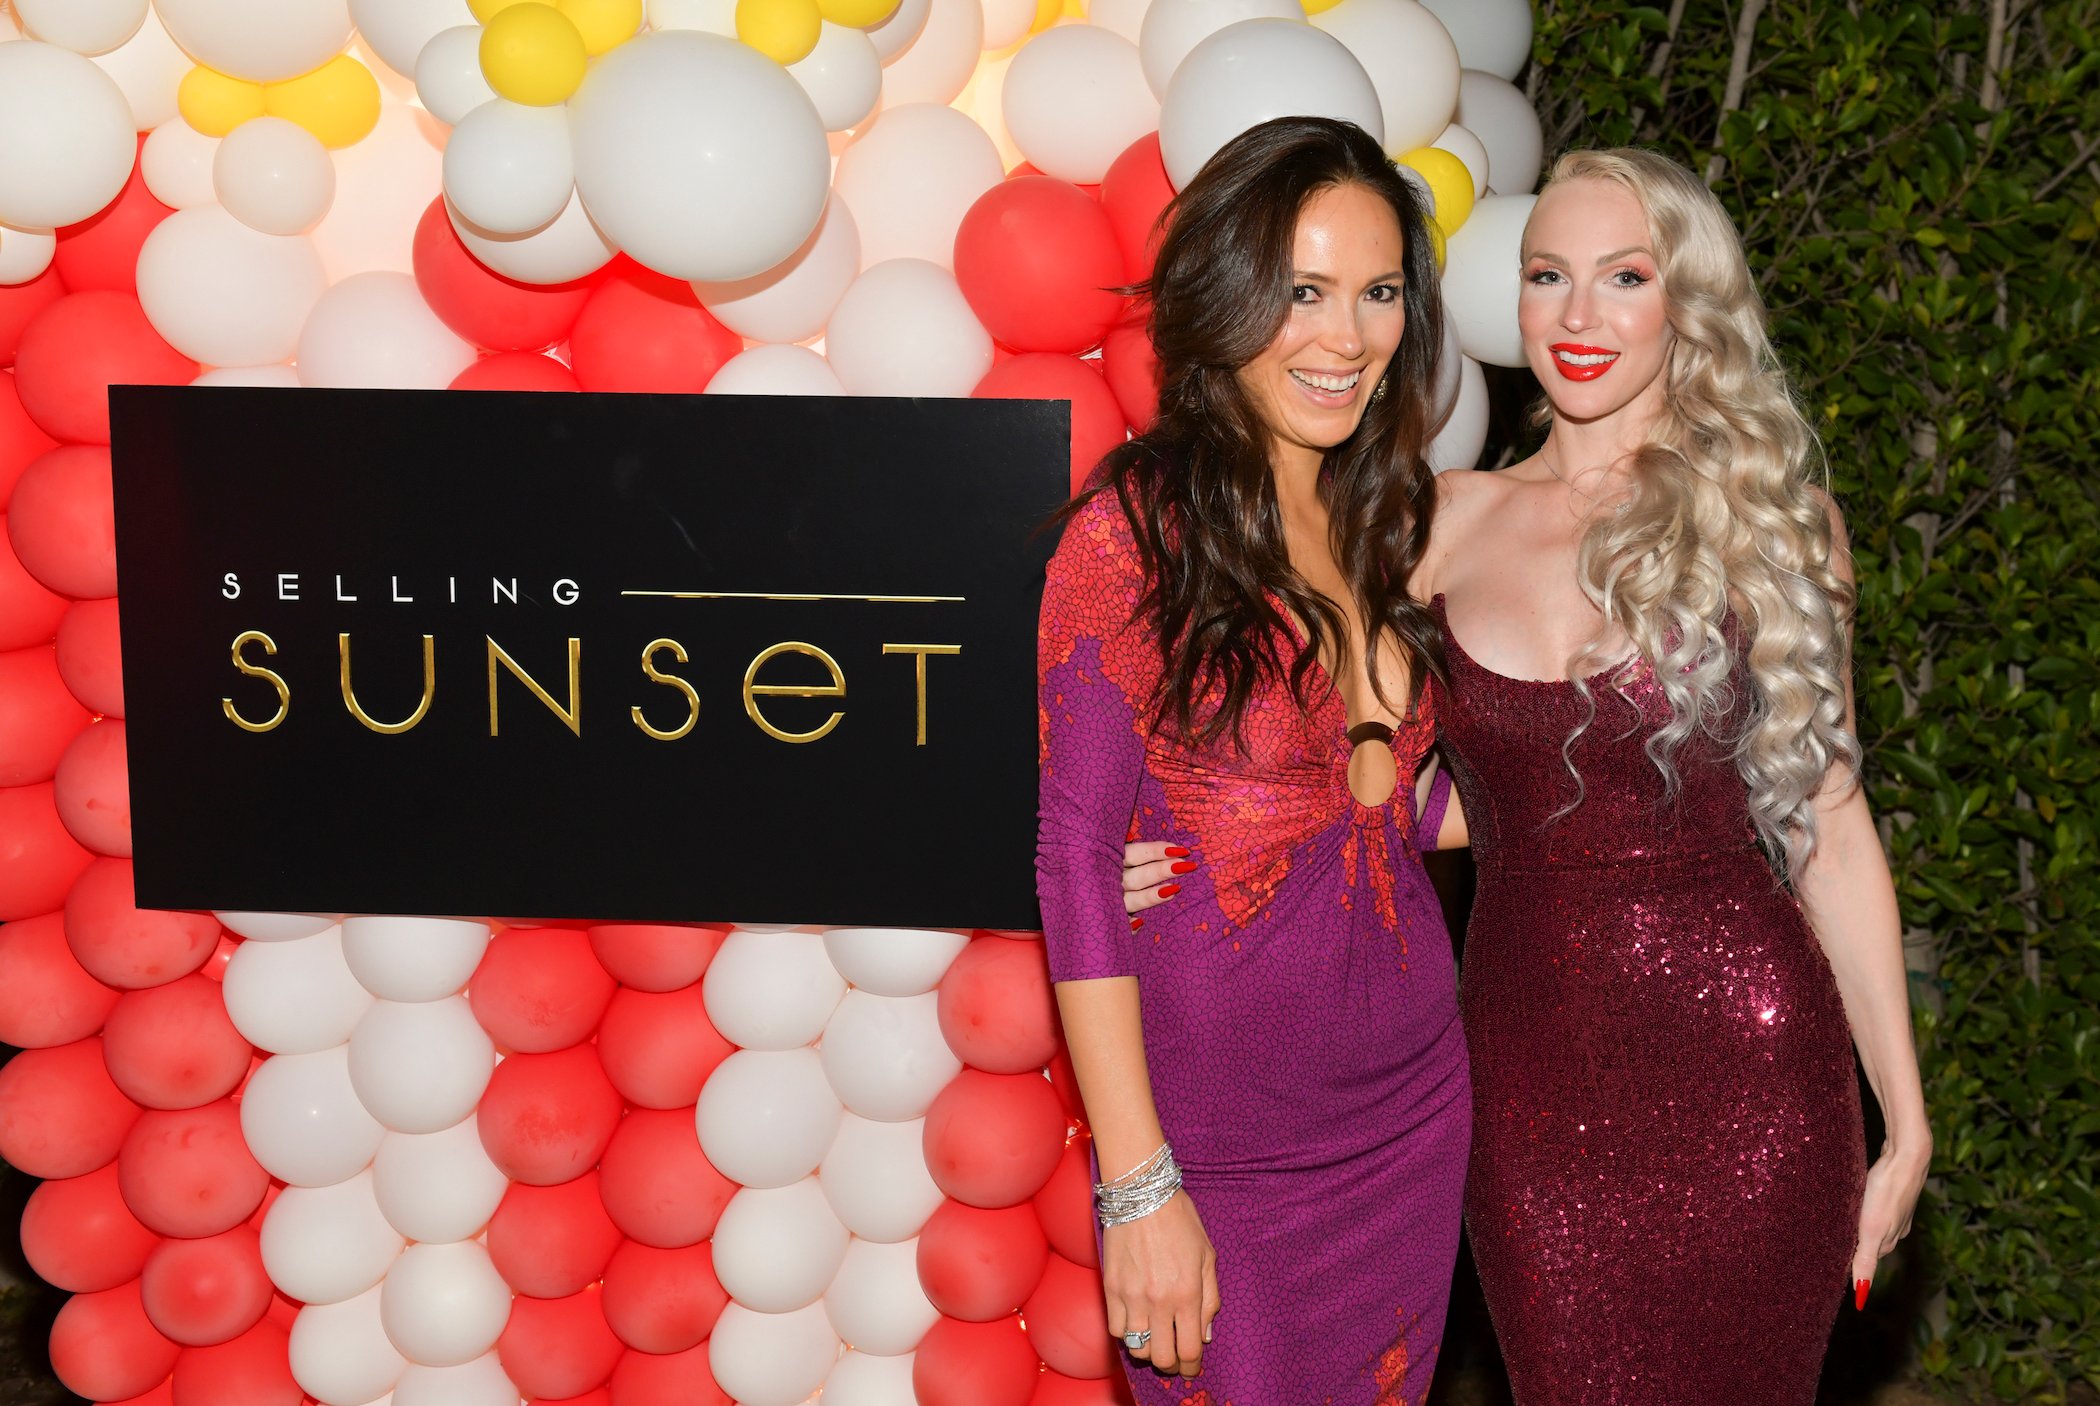 Davina Potratz (L) and Christine Quinn from 'Selling Sunset' Season 4 standing with their arms around each other next to a 'Selling Sunset' sign at a viewing party